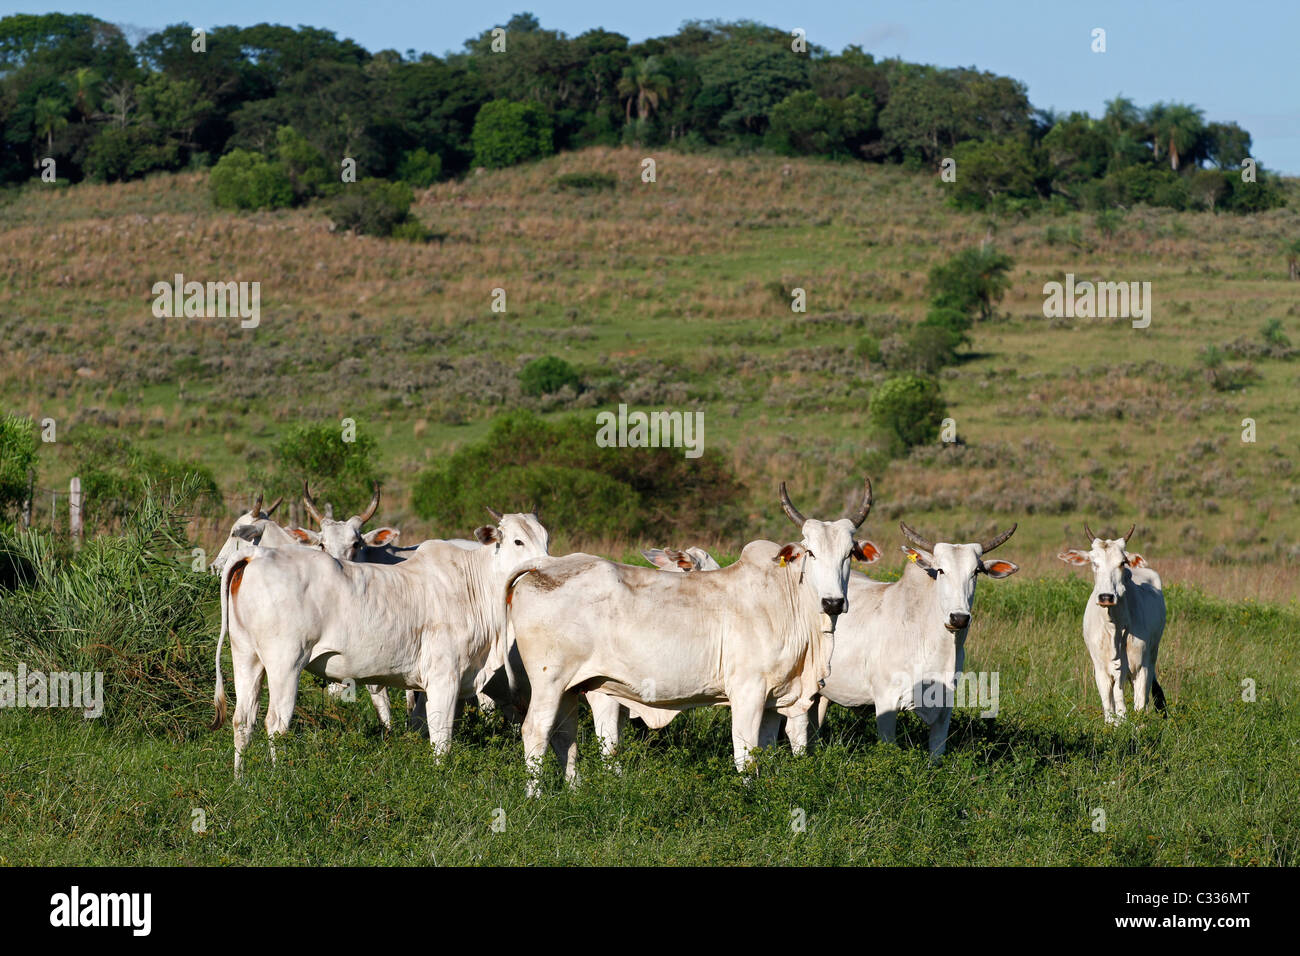 Cattle farming in Paraguay Stock Photo